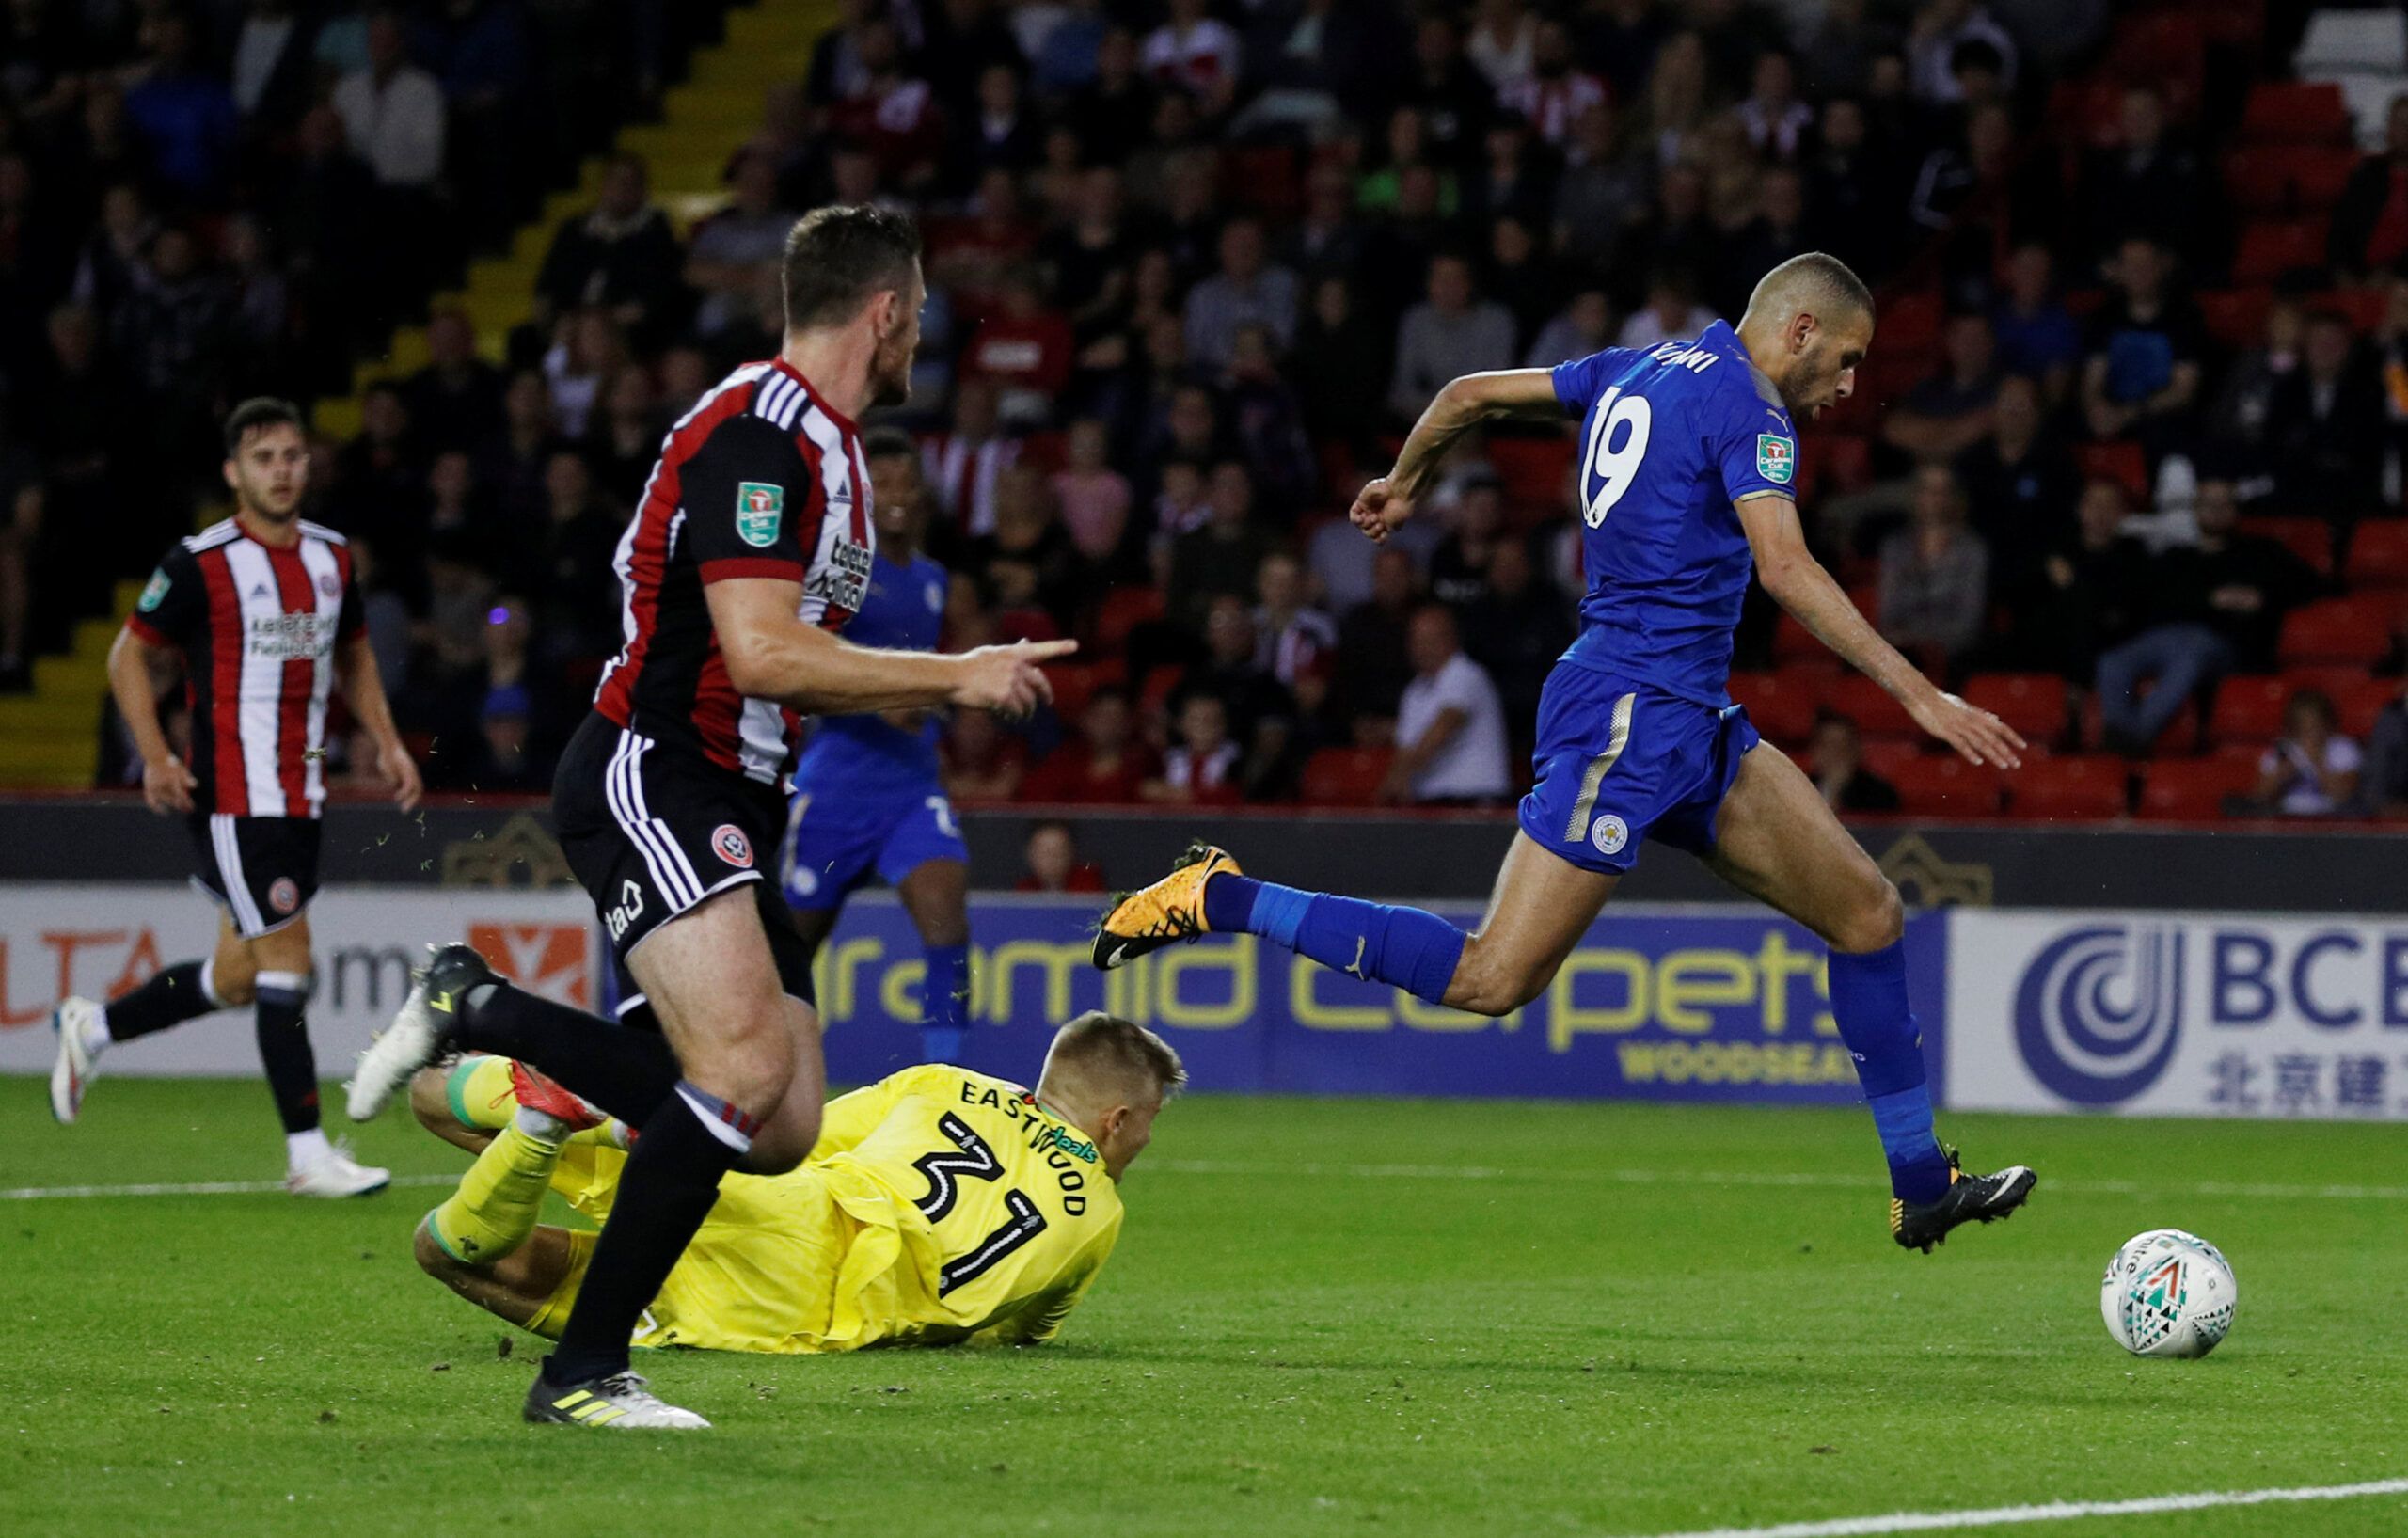 Soccer Football - Carabao Cup Second Round - Sheffield United vs Leicester City - Sheffield, Britain - August 22, 2017   Leicester City's Islam Slimani rounds Sheffield United's Jake Eastwood to scores their second goal    Action Images via Reuters/Lee Smith     EDITORIAL USE ONLY. No use with unauthorized audio, video, data, fixture lists, club/league logos or 